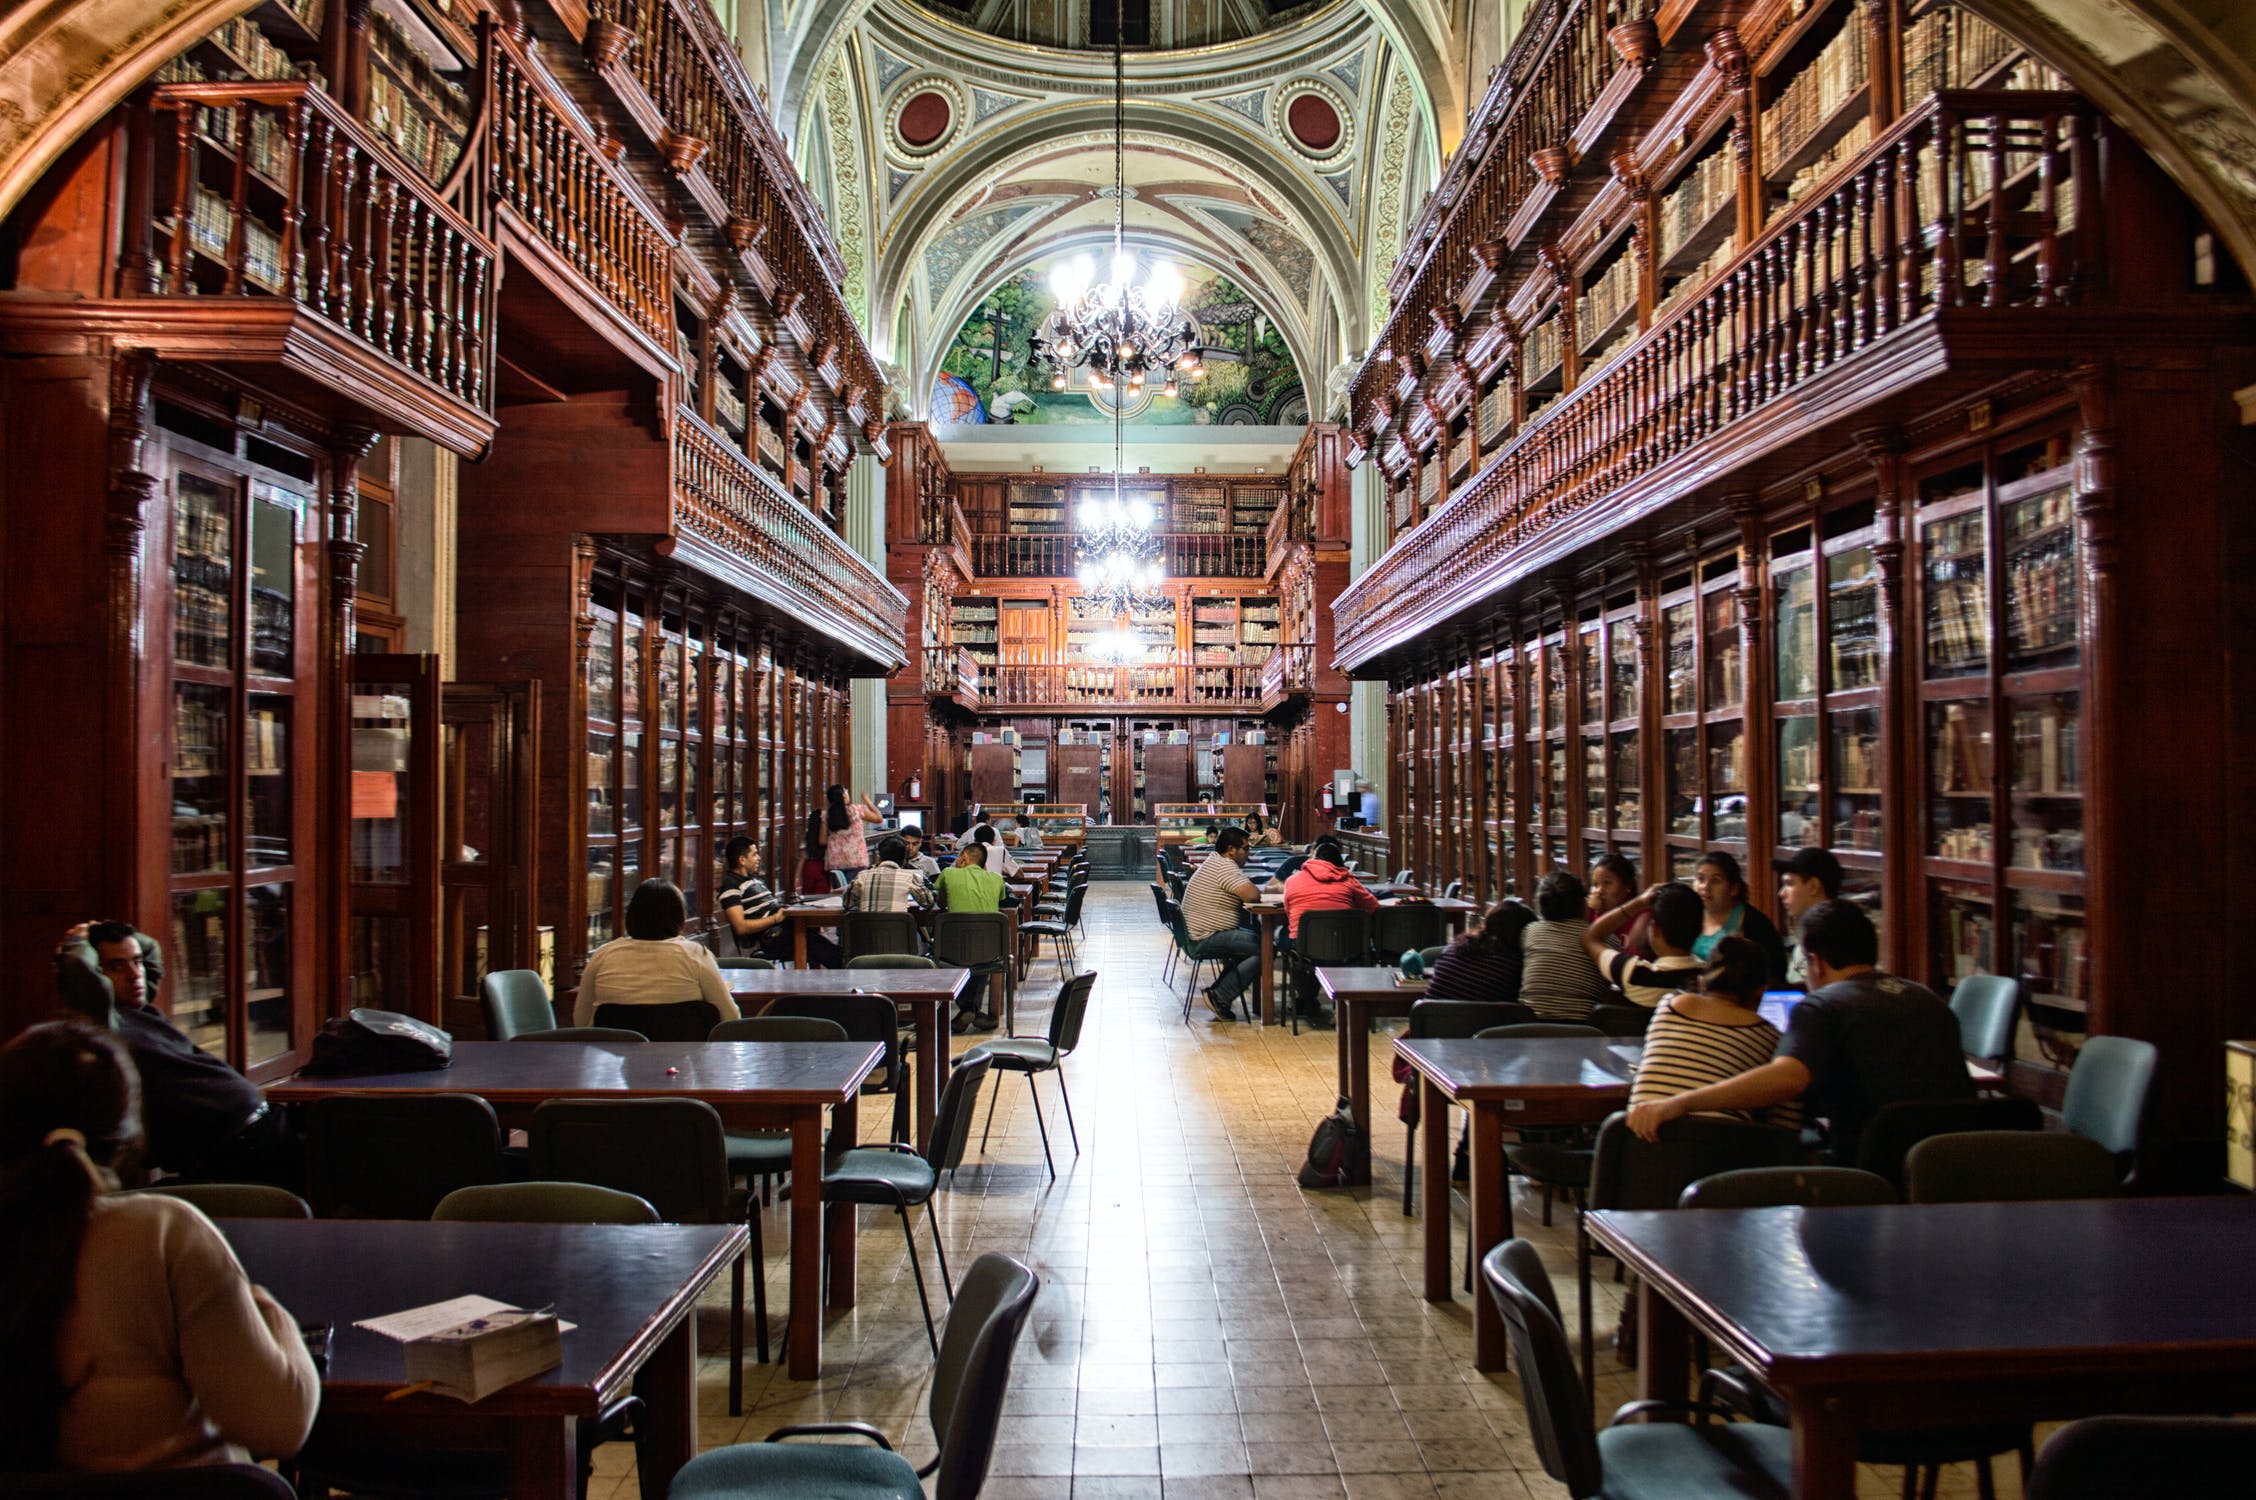 People study in a large fancy library.